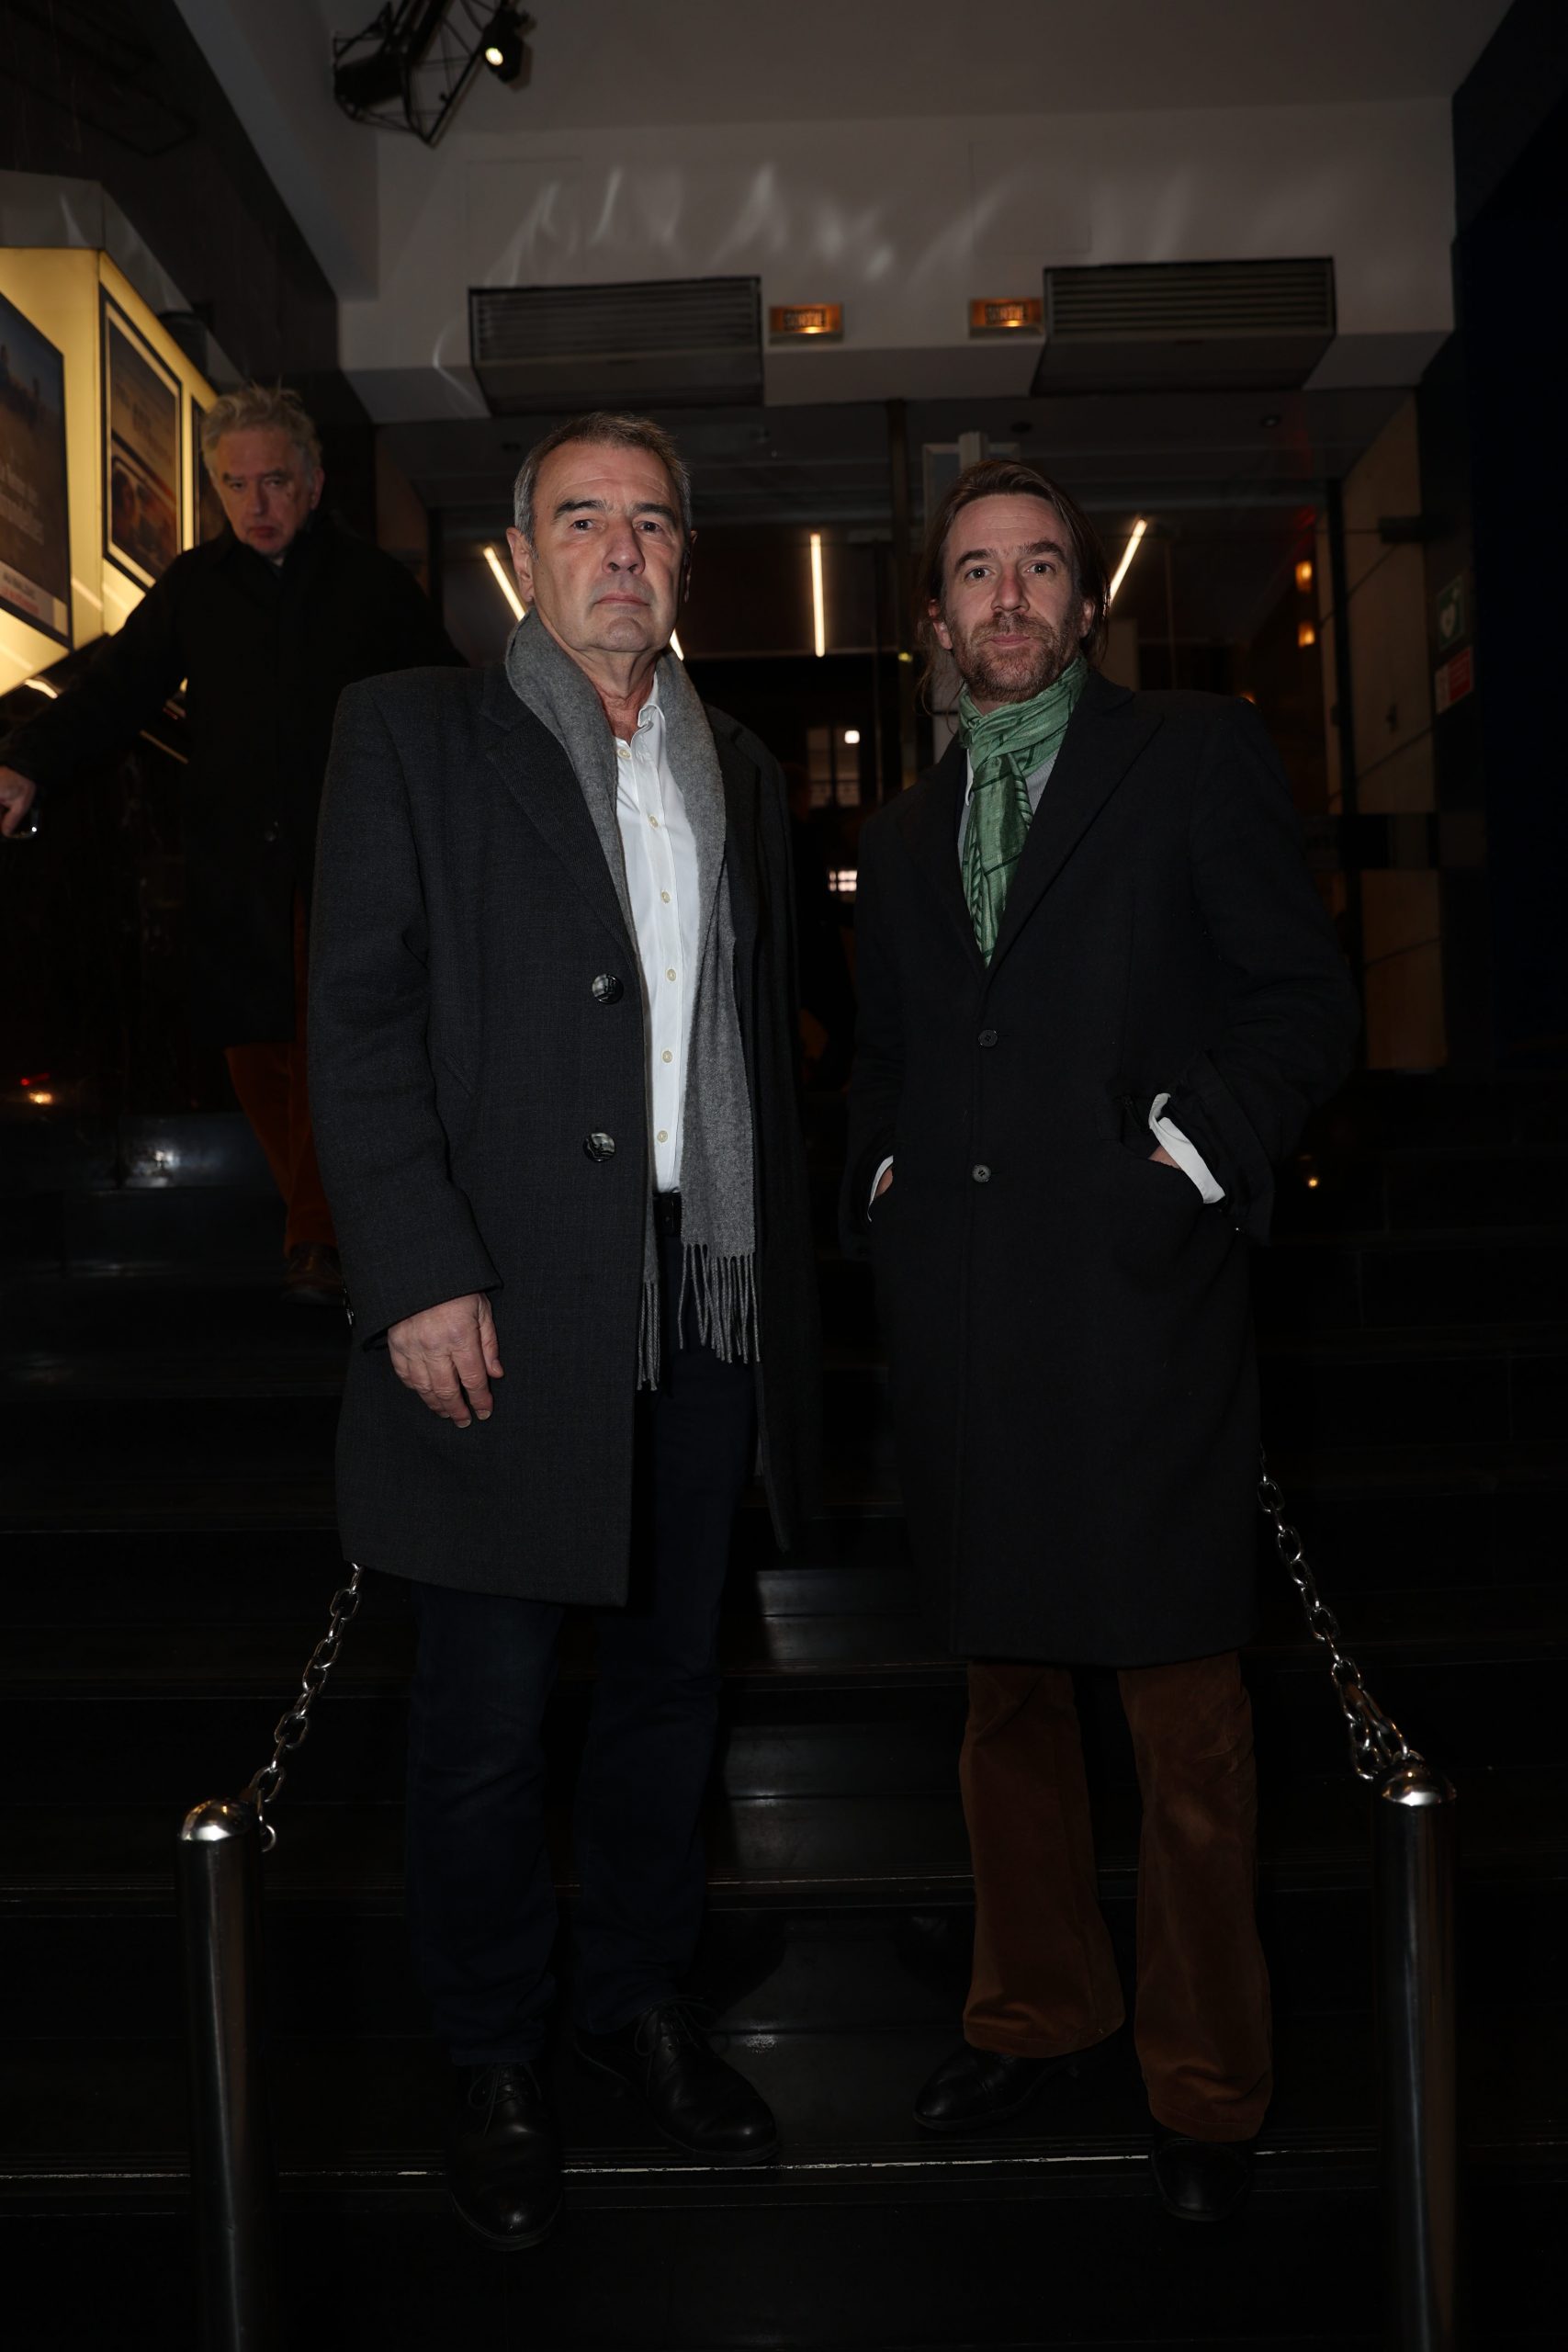 Marc Roussel and Olivier Jacquin at the preview of BHL's film "Slava Ukraini" on 6 February 2023 at the Balzac. Photo: Igor Shabalin